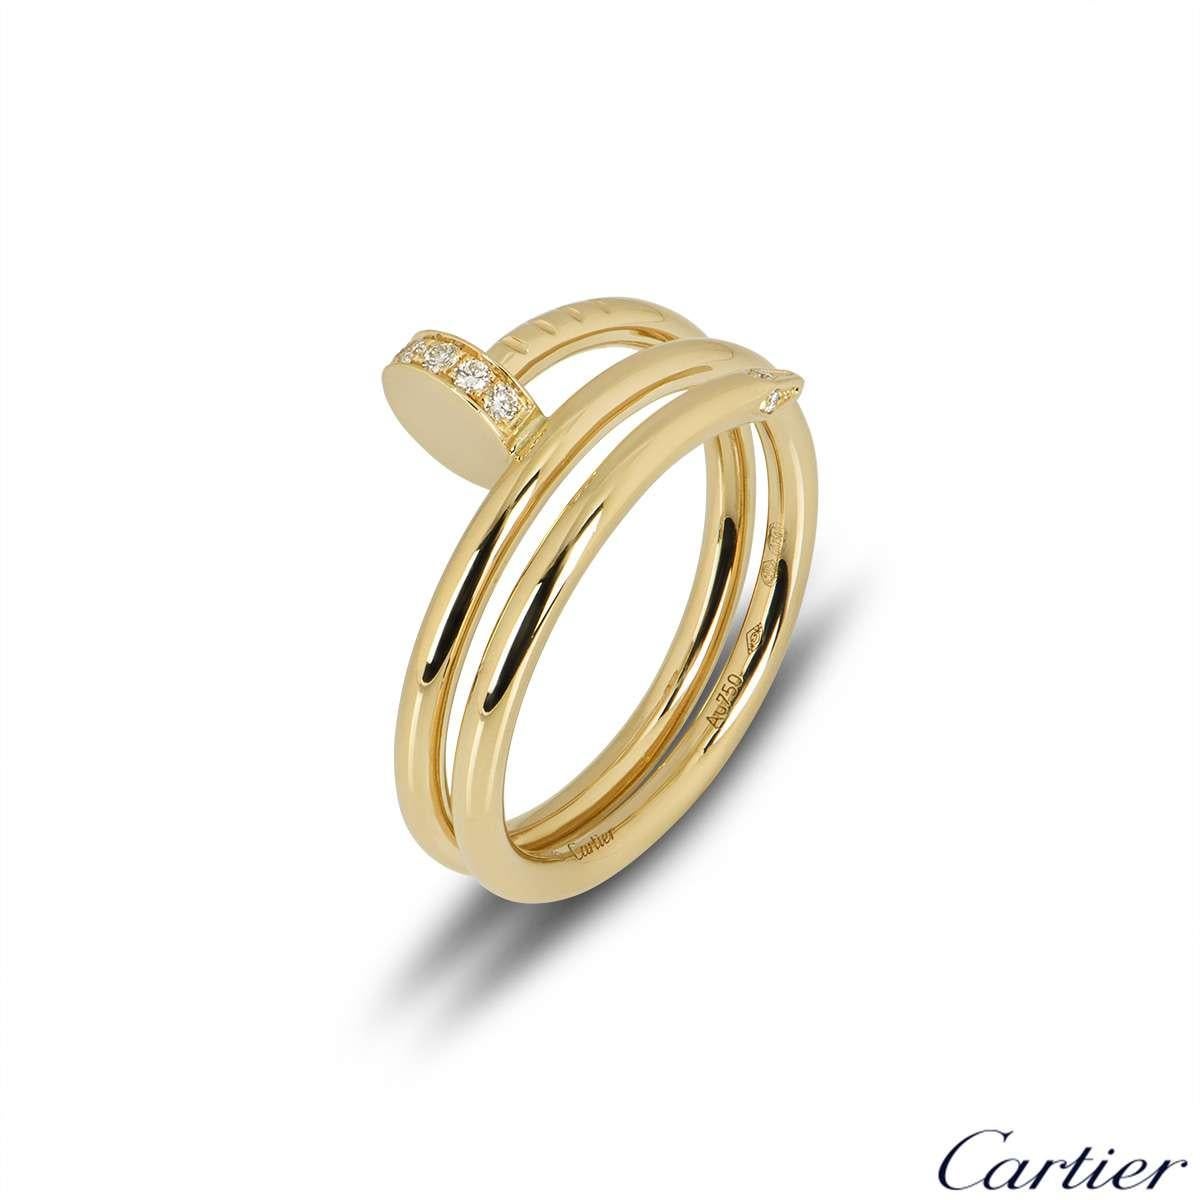 An 18k yellow gold double Juste Un Clou ring by Cartier. The ring is in the style of a nail wrapping around the finger, set with 14 round brilliant cut diamonds with a total weight of 0.08ct. The ring measures 1cm at the widest point and is a size